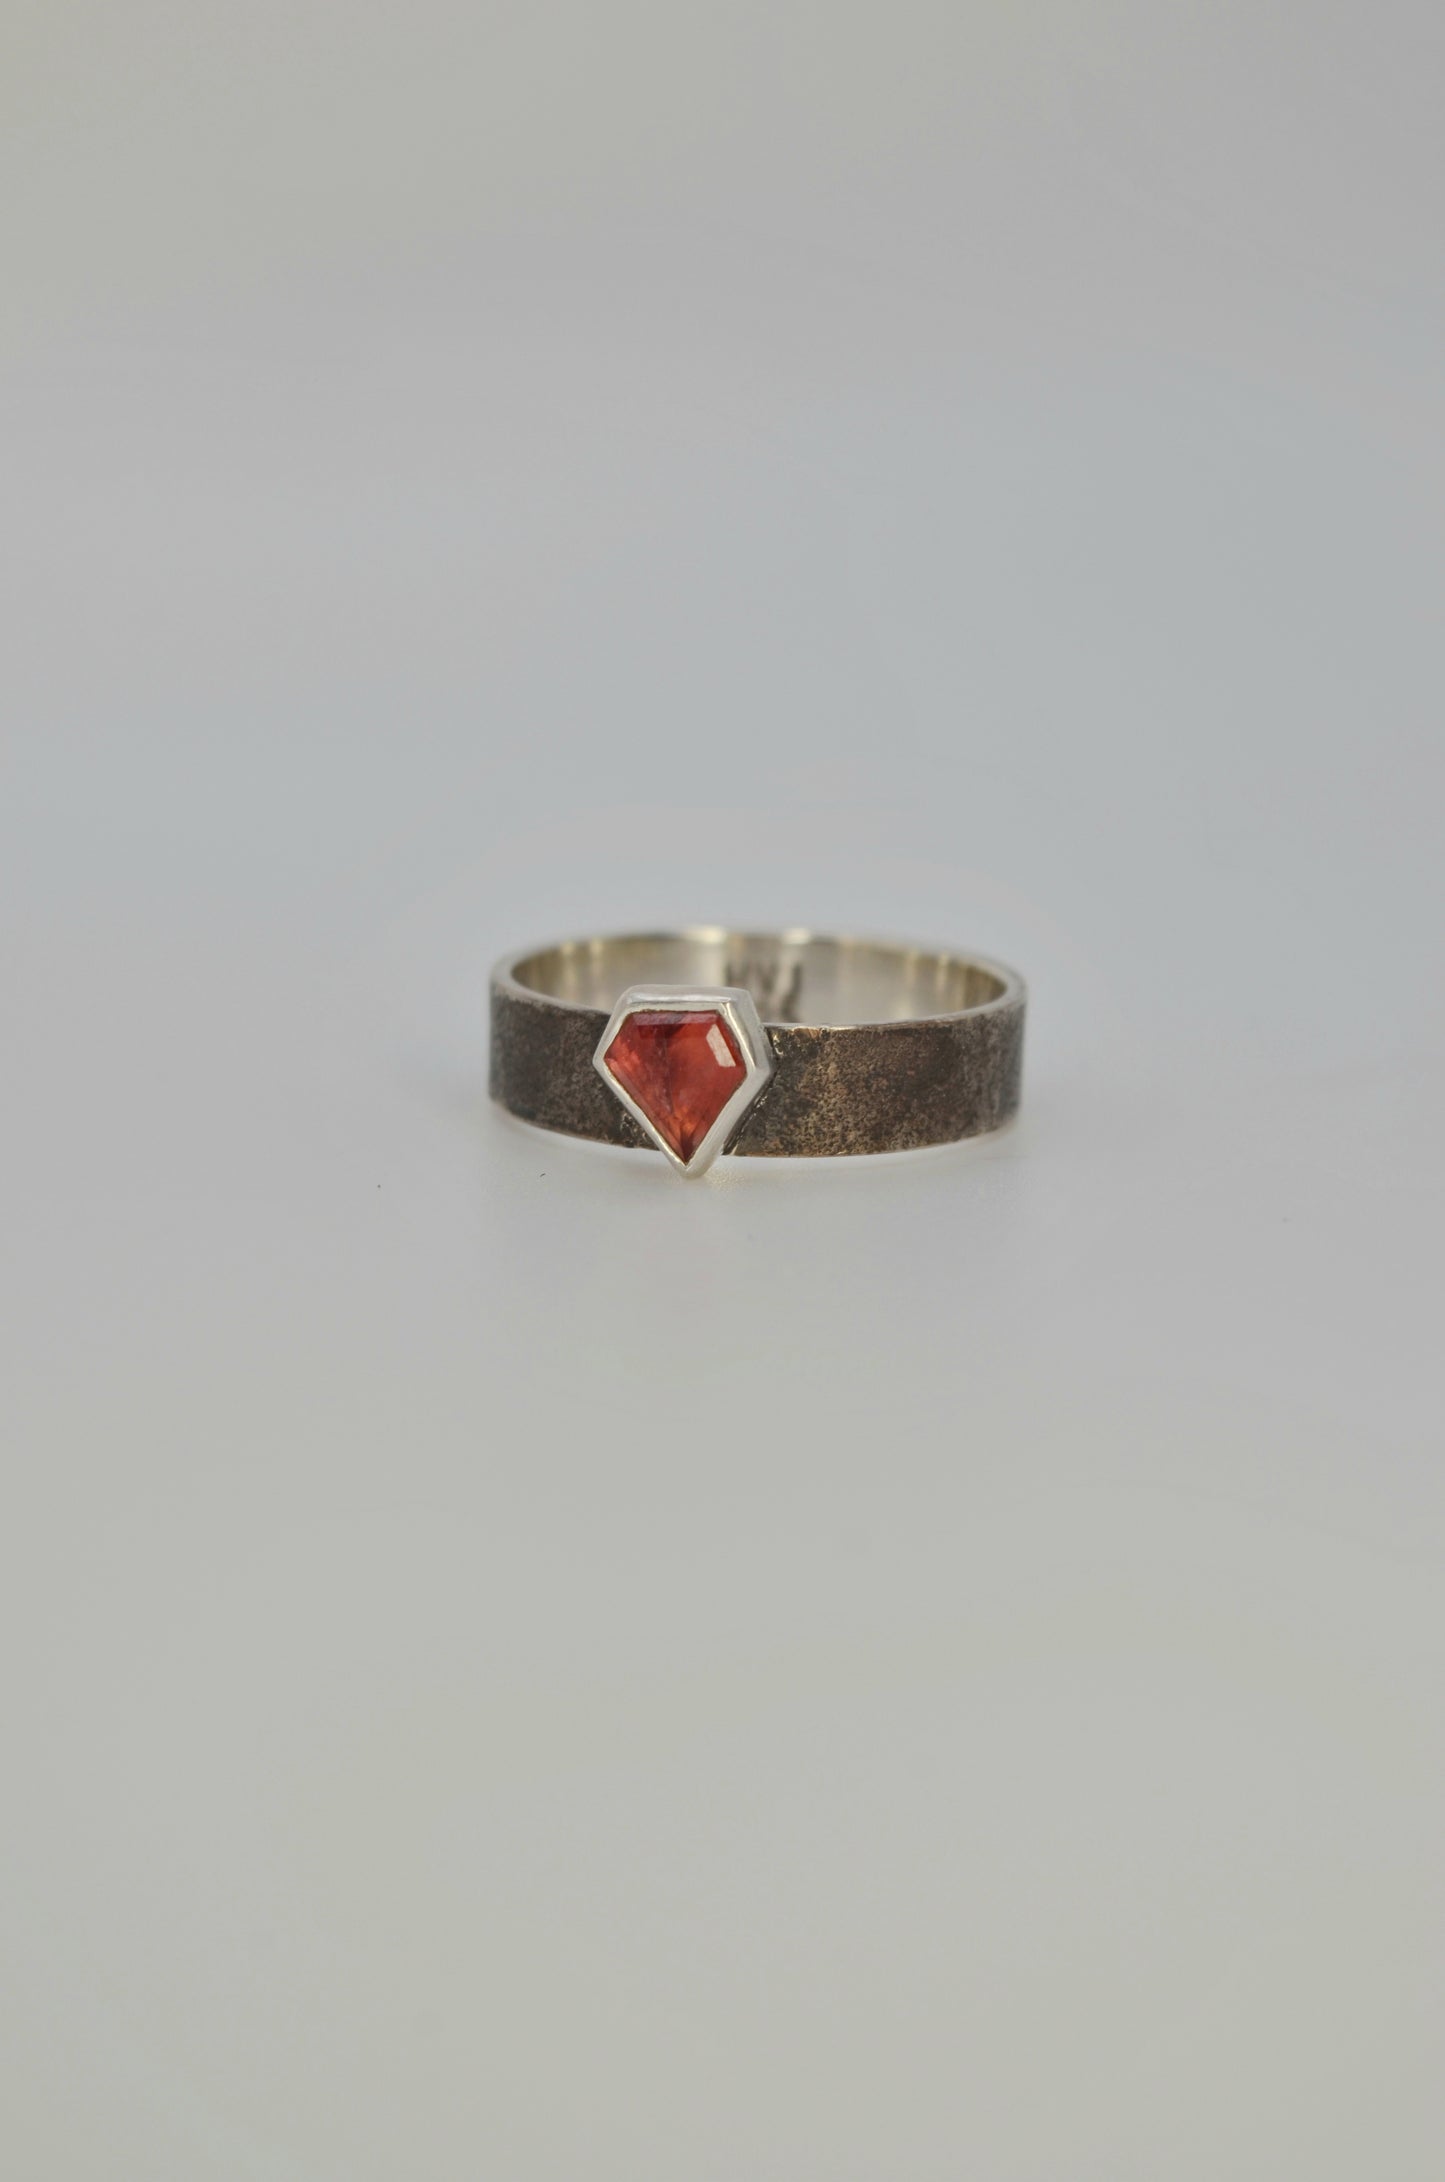 Red Spinel Natural Gemstone Sterling Silver Ring, Antique, Minimalist, Black Textured Band, Size 9.5 U.S.